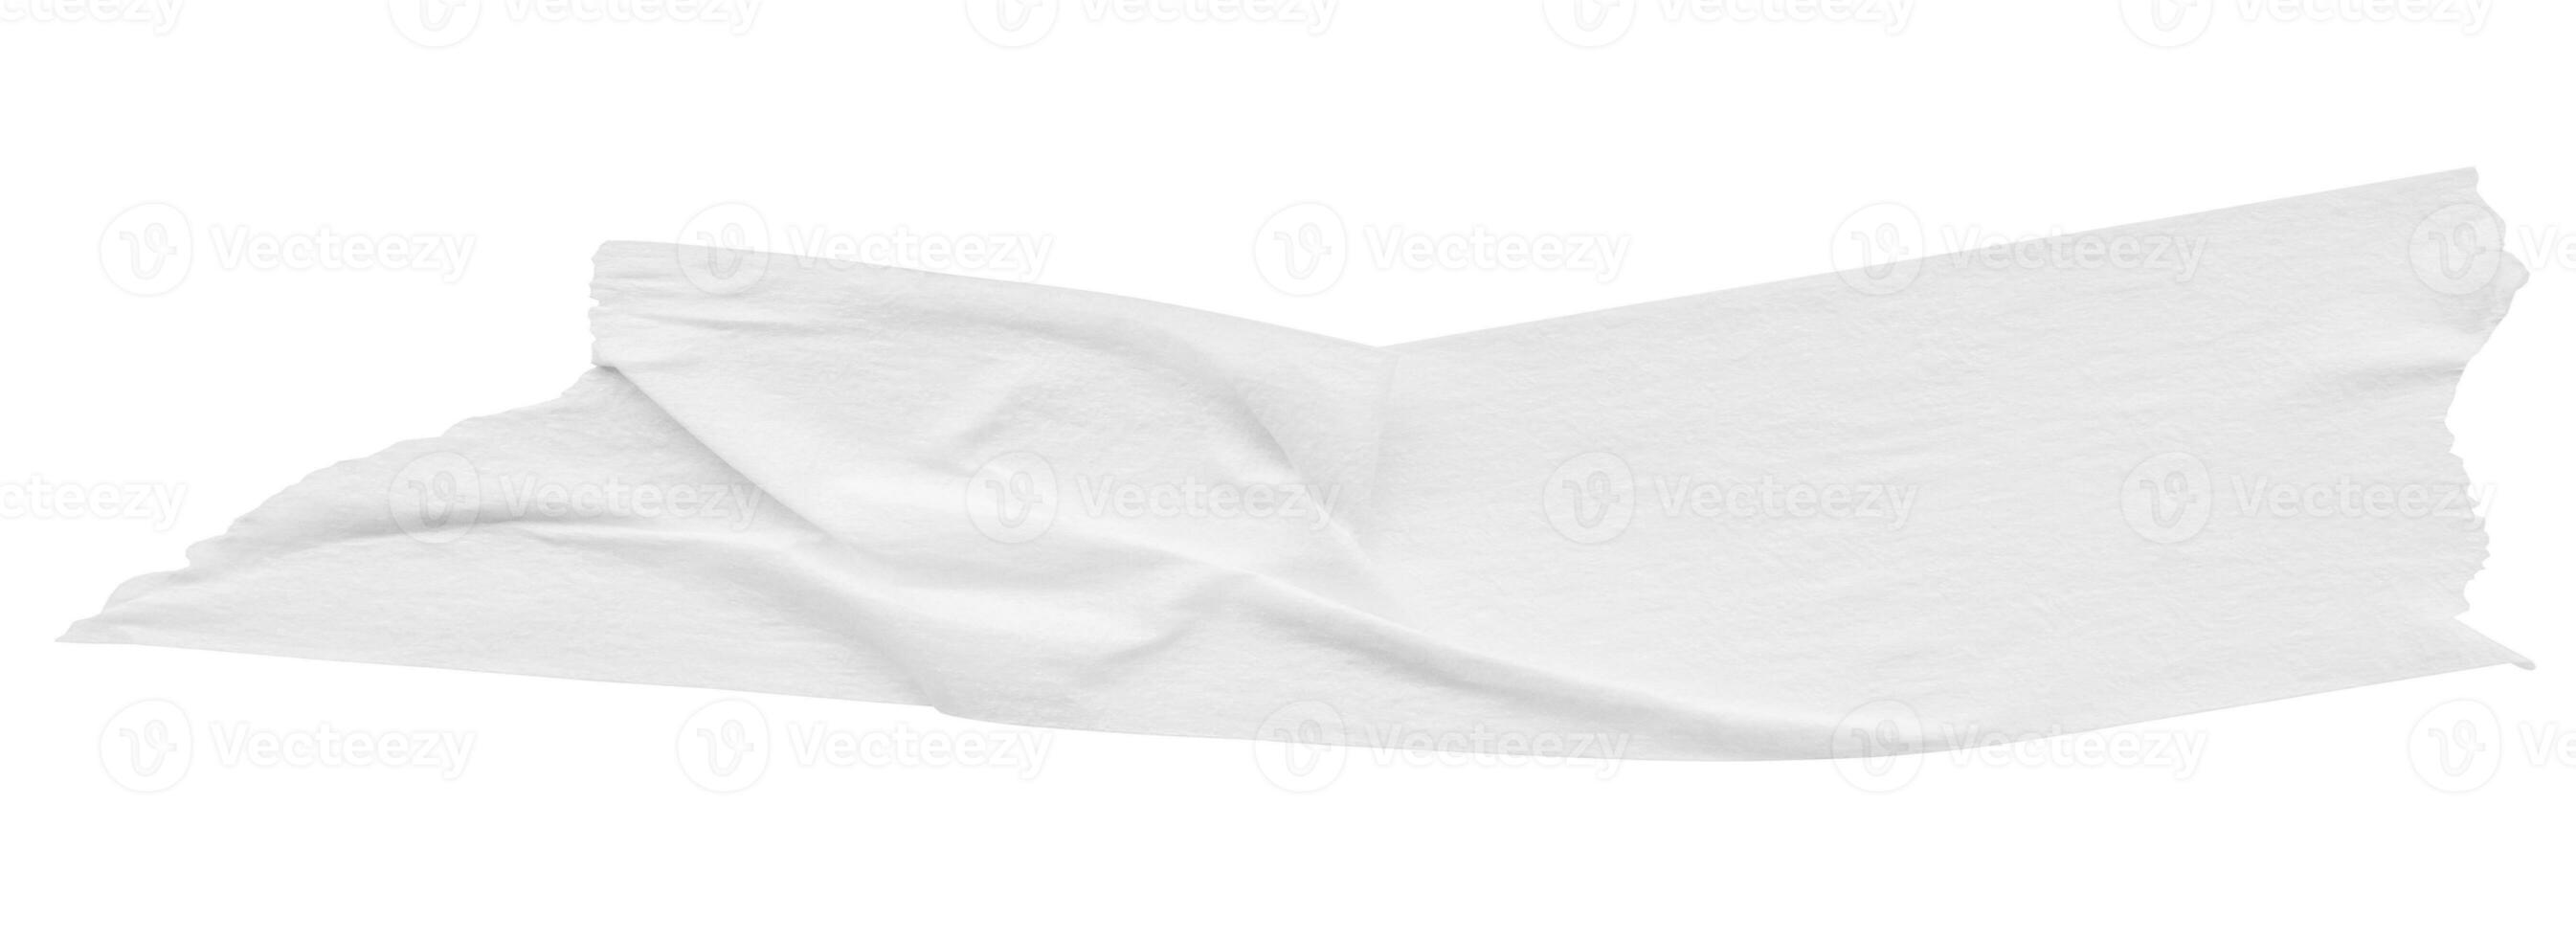 White adhesive paper tape isolated on white background photo